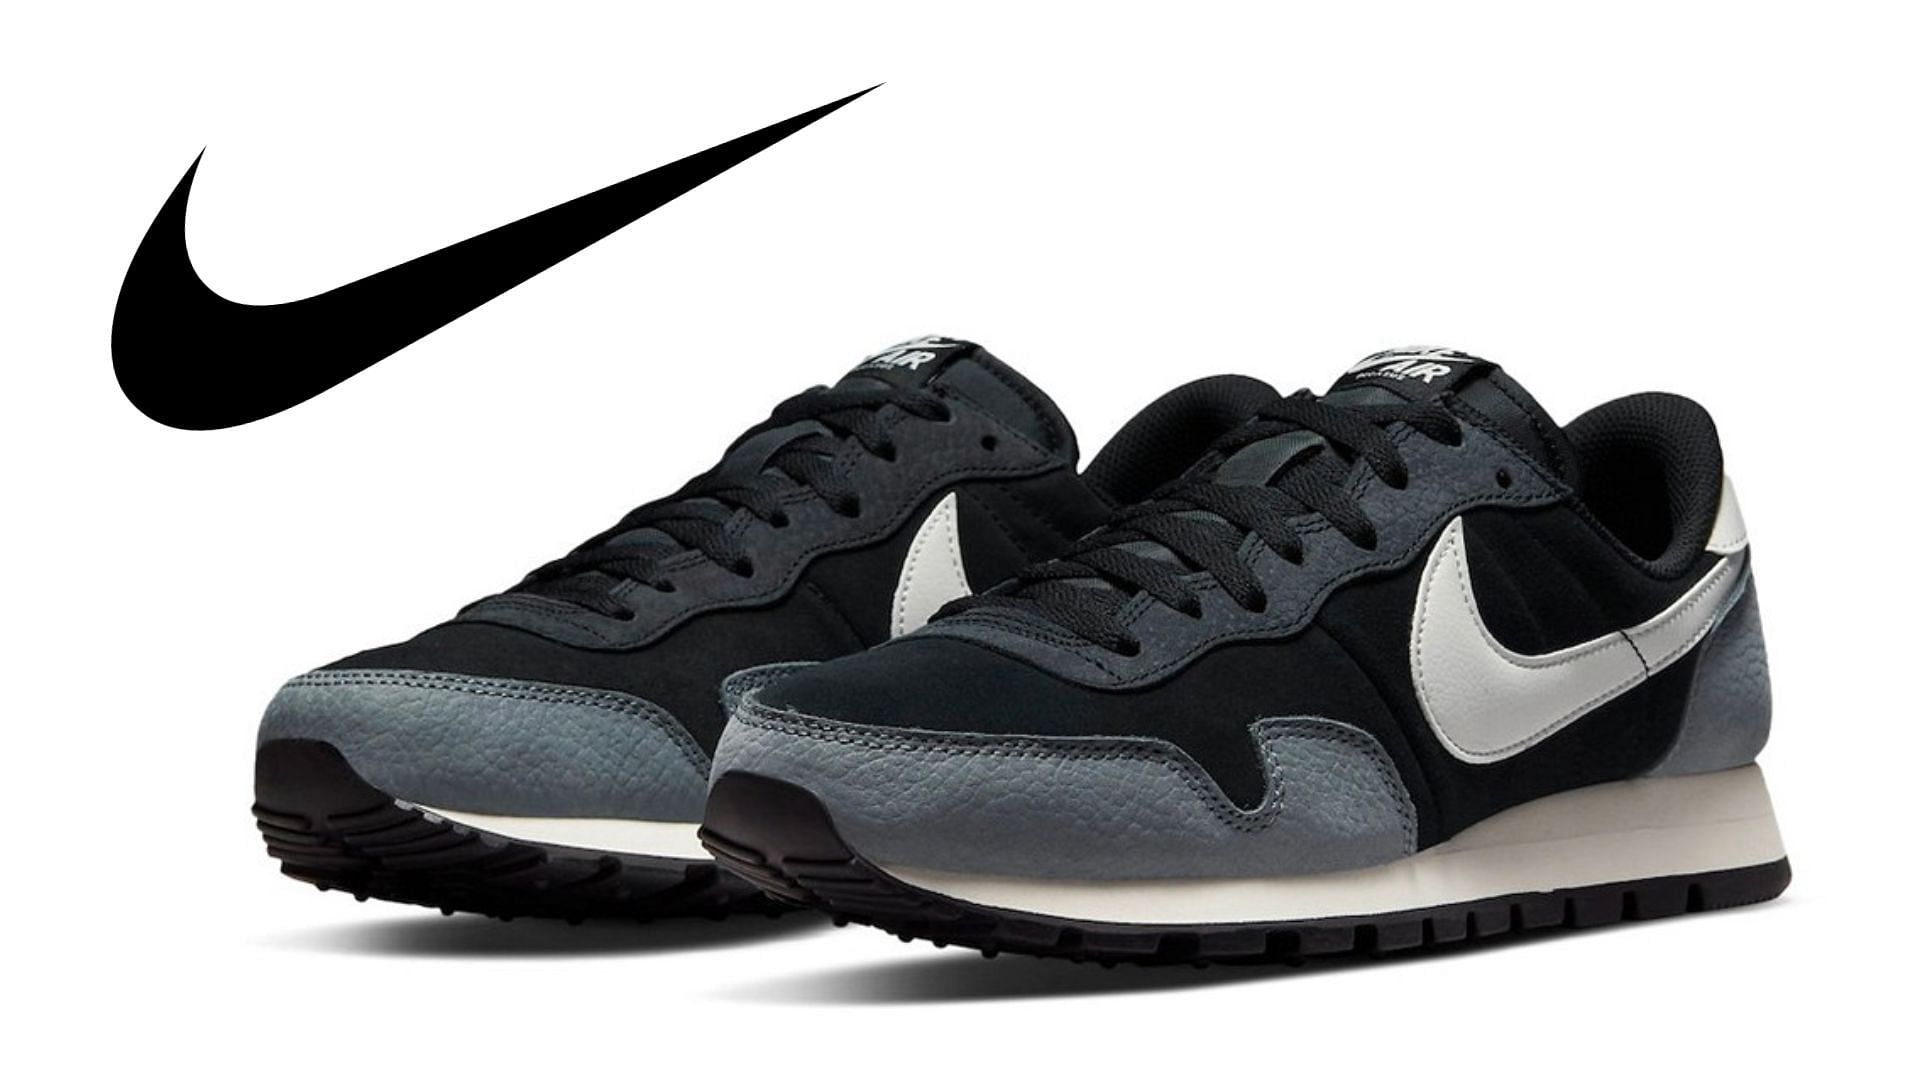 Where to buy Air Pegasus '83 Black and Cool Grey shoes? Release date, price and more details explored